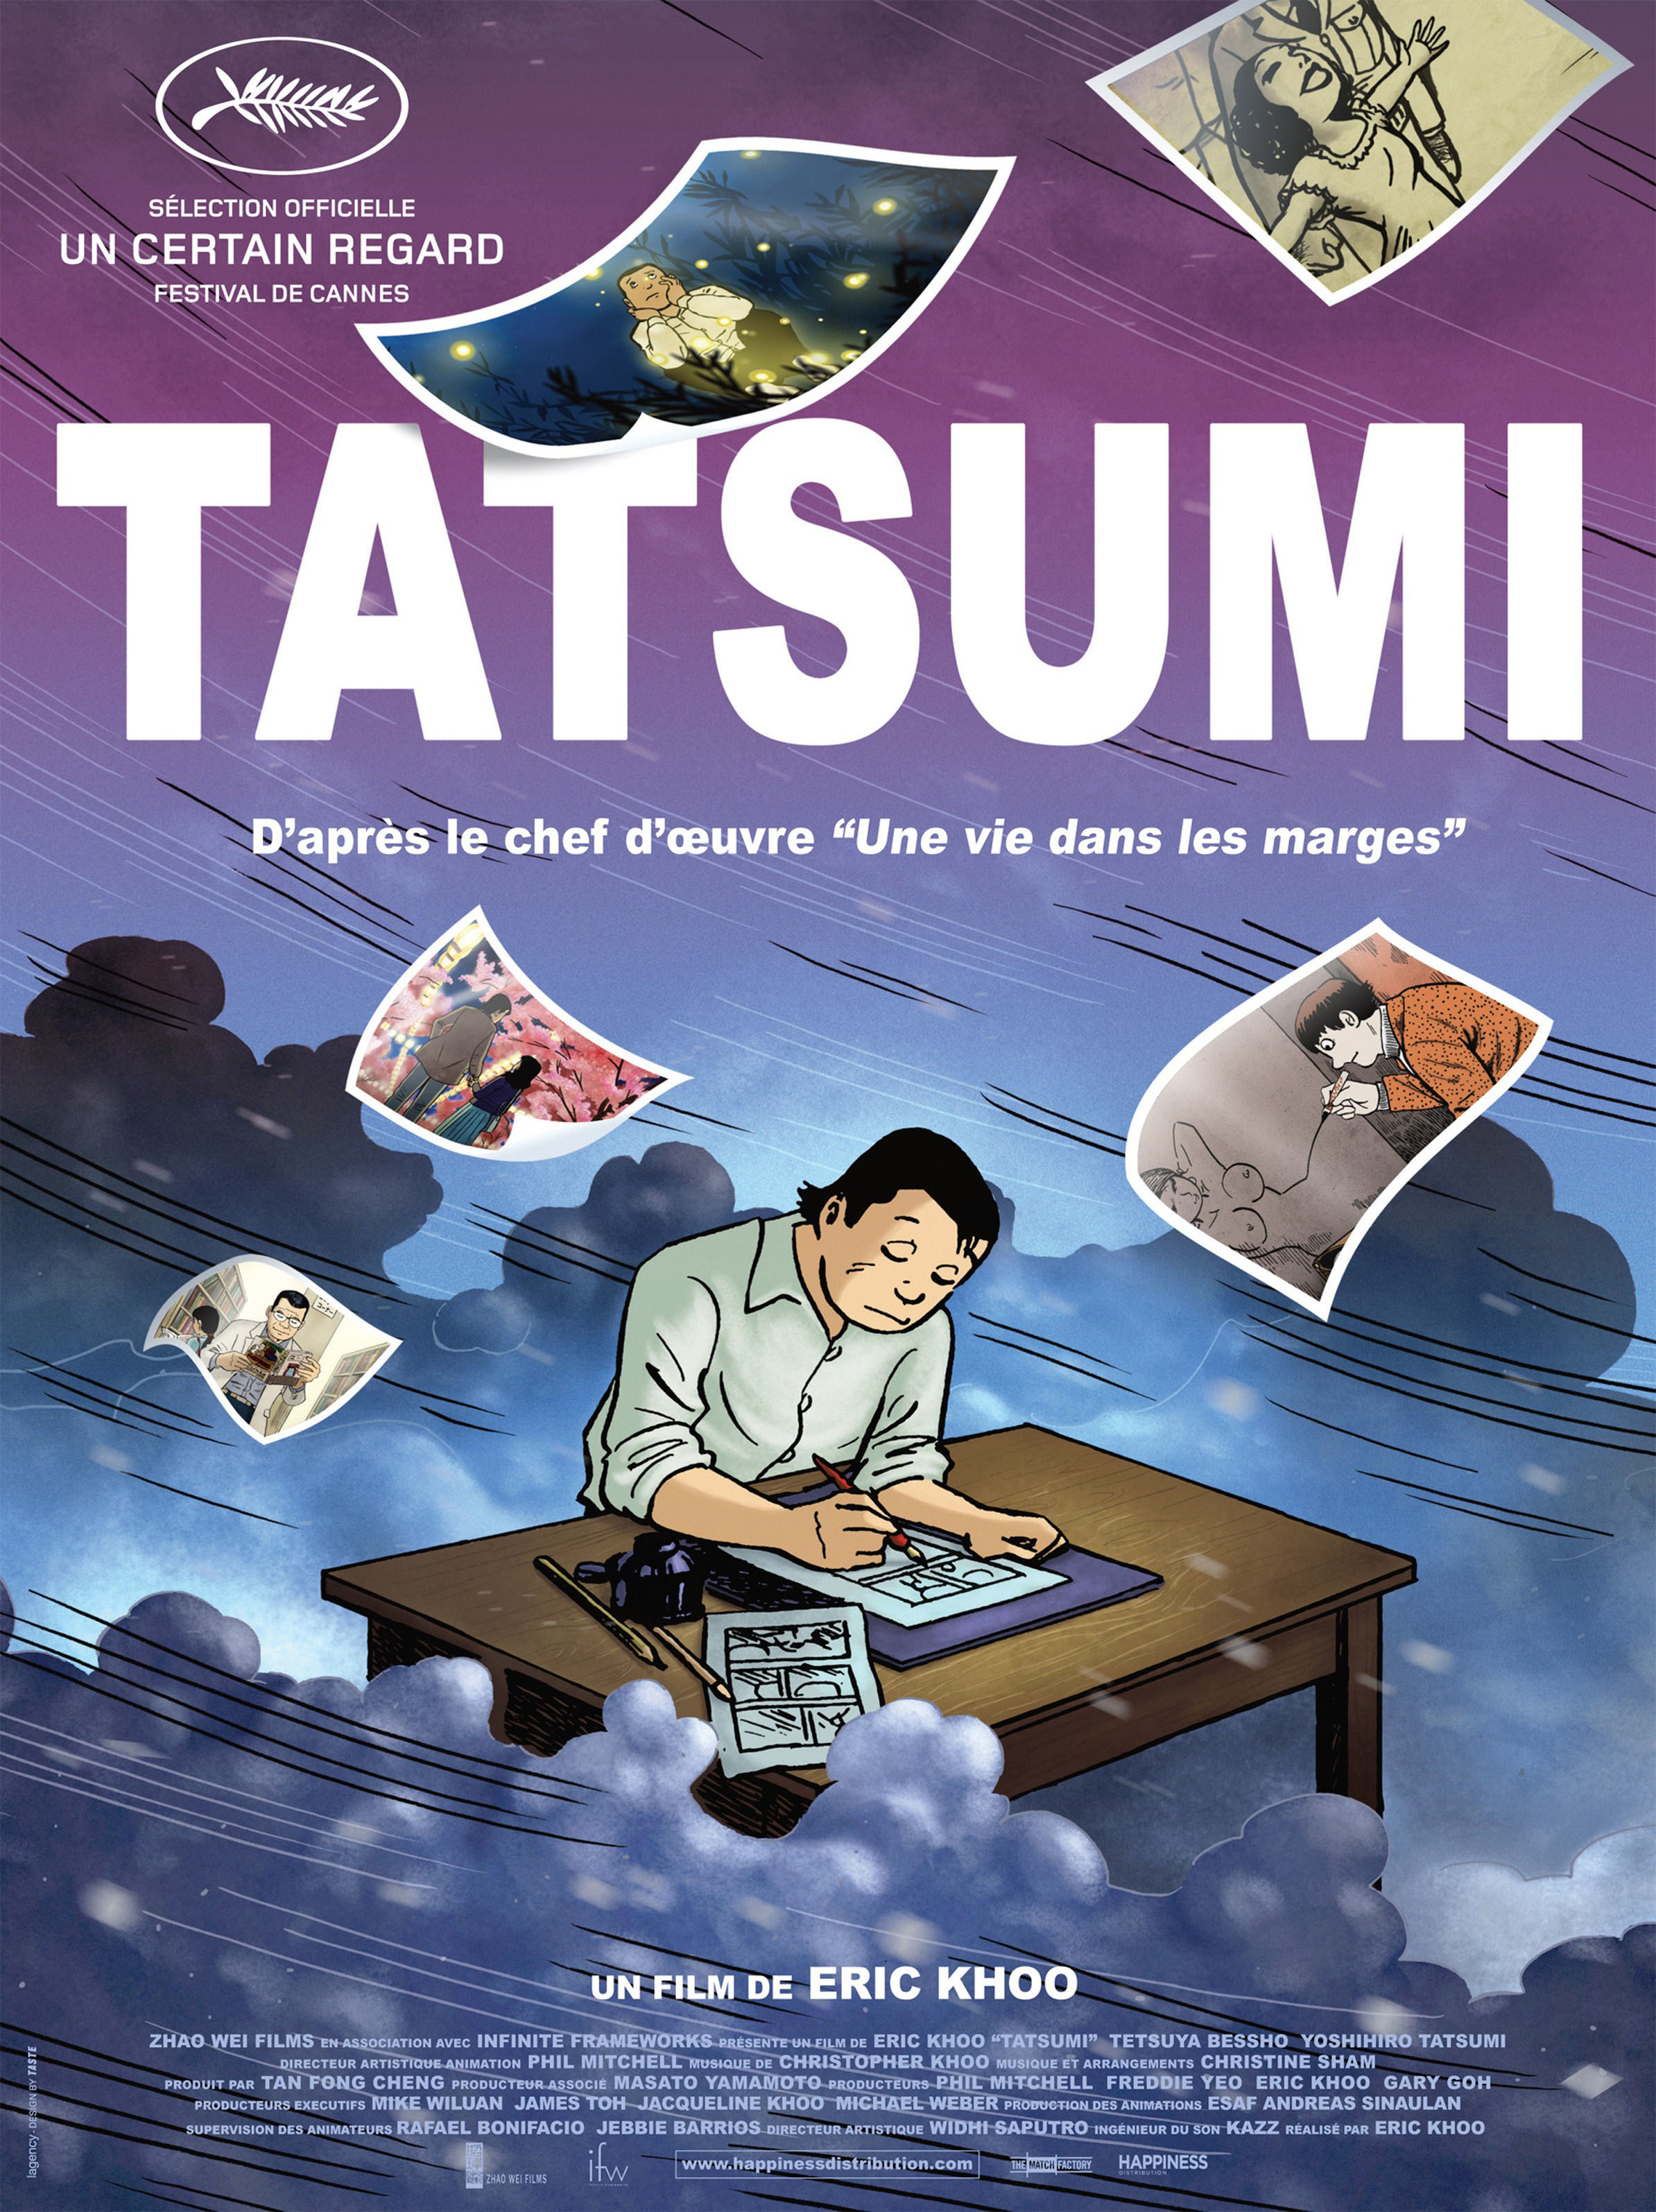 Poster image for the animated film Tatsumi depicting the main character drawing a comic at his desk during a rain storm as pages fly away.